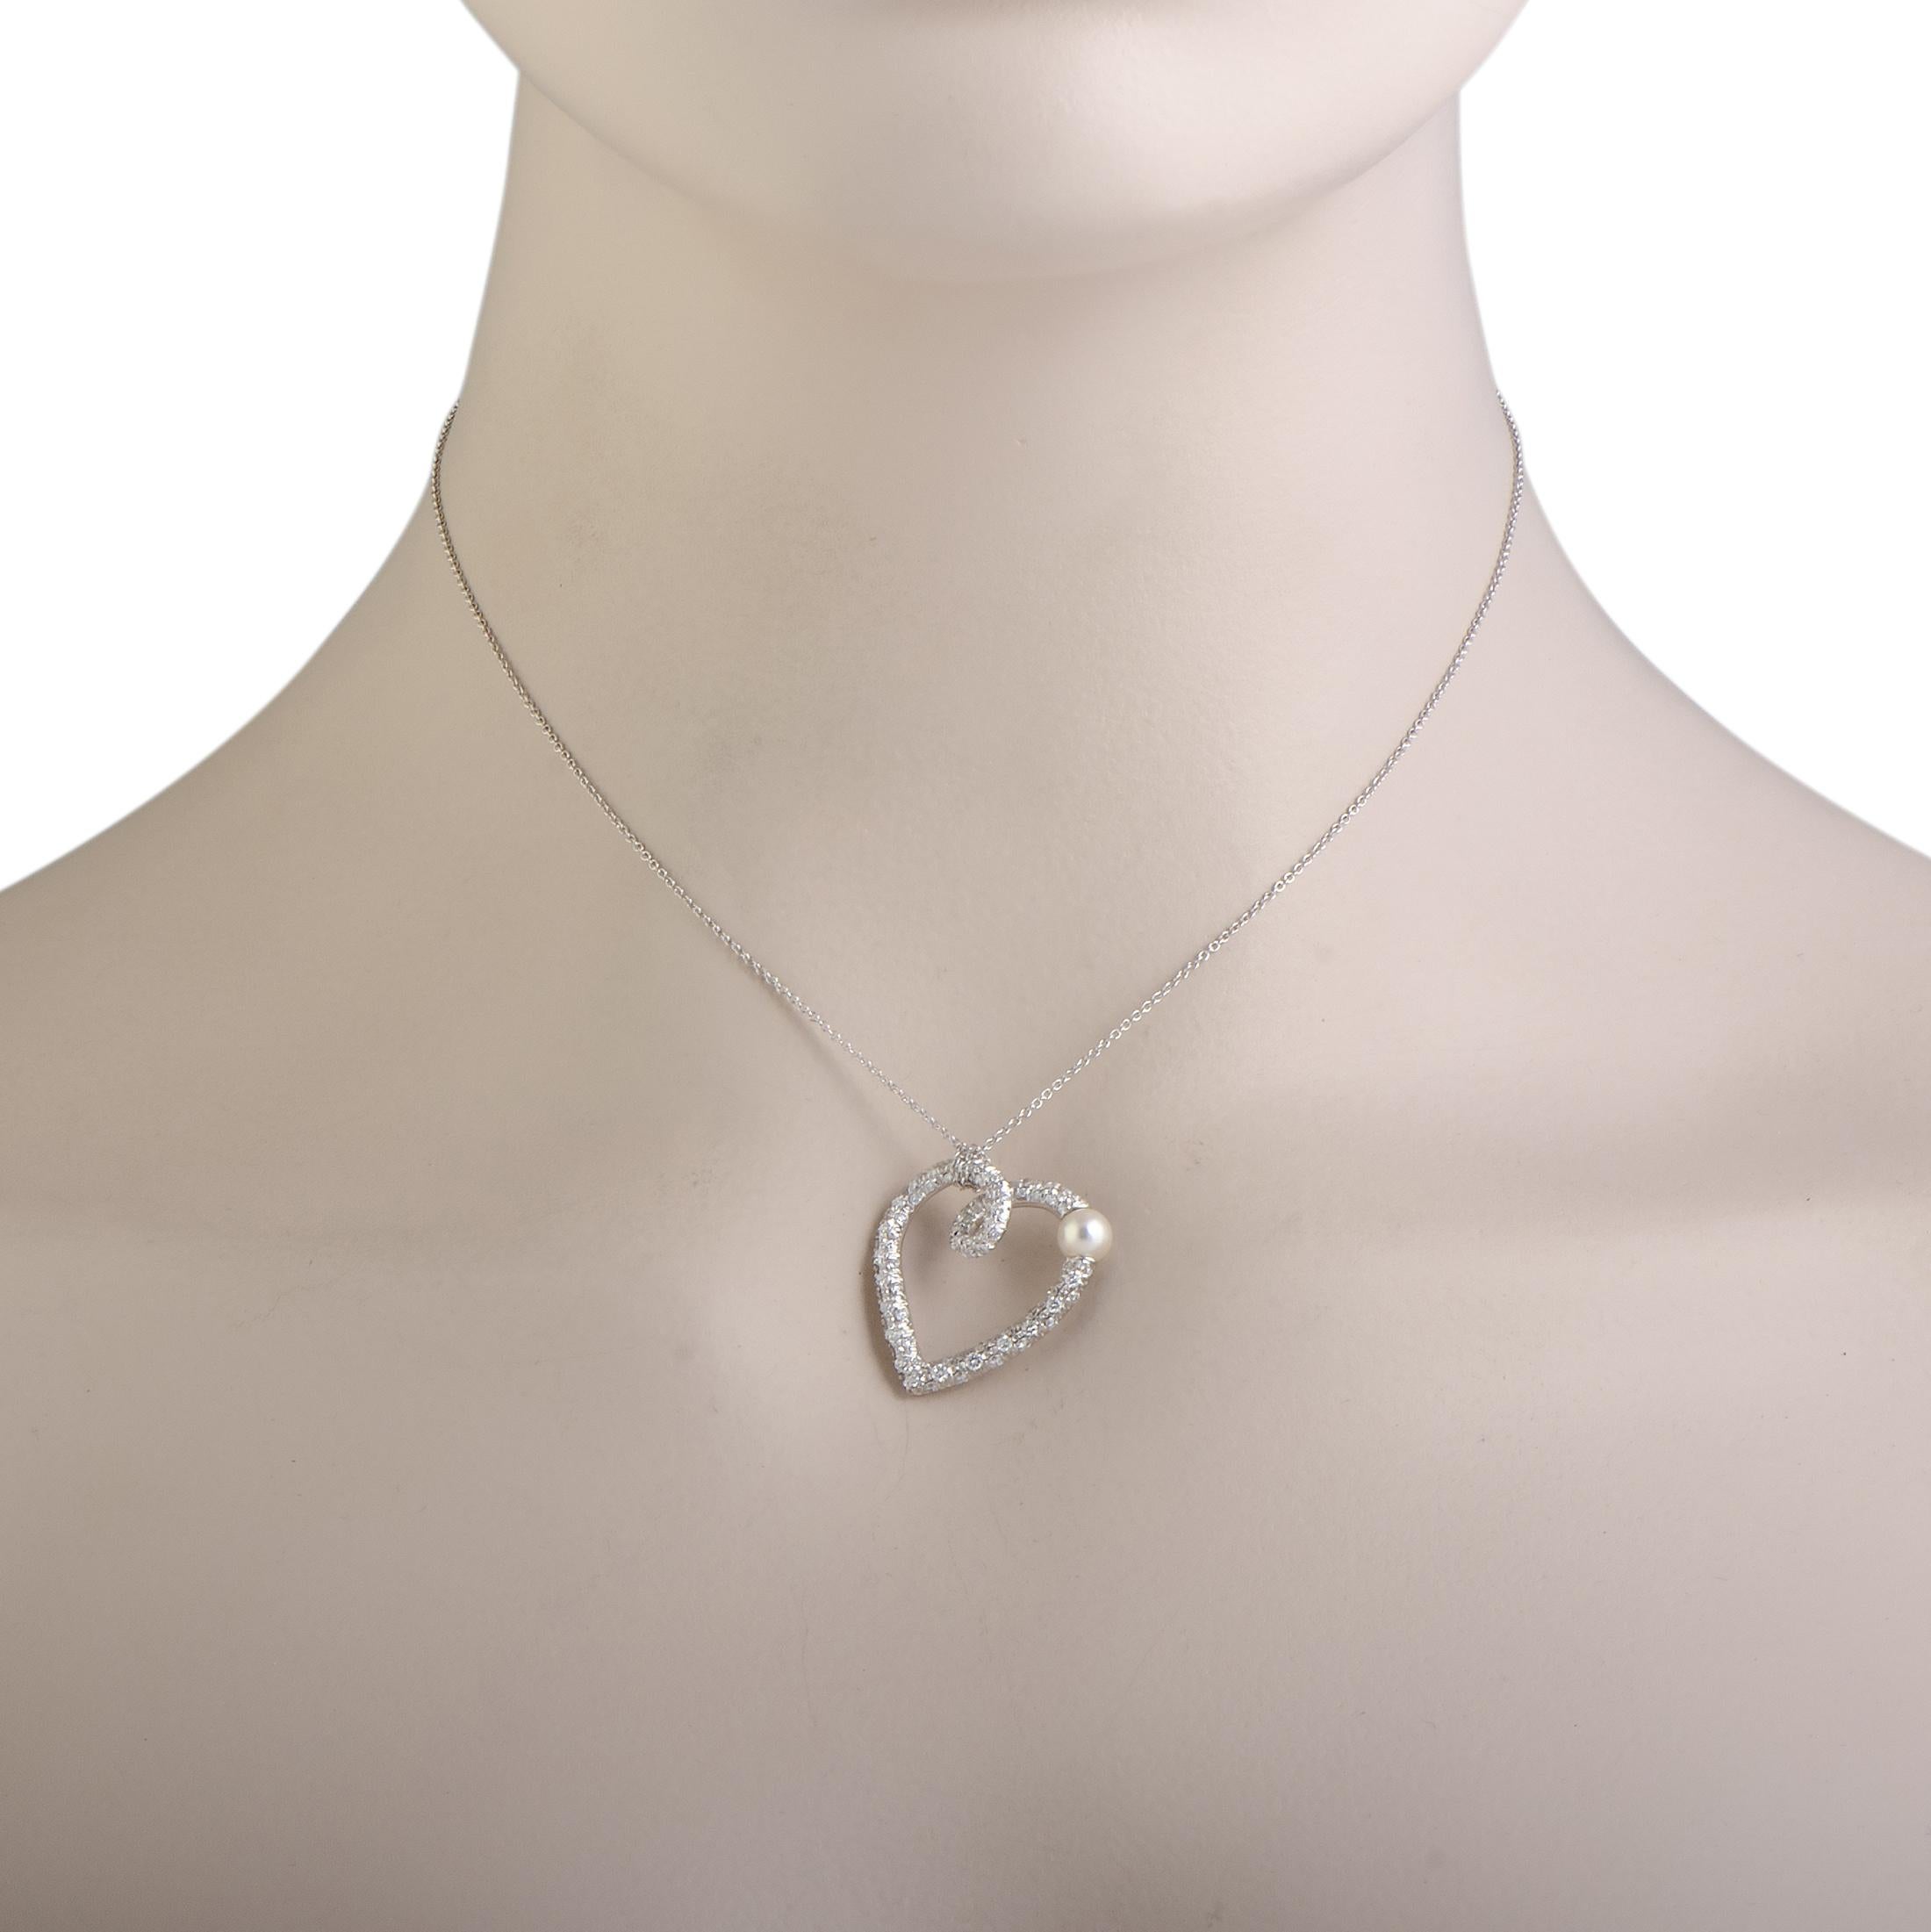 This classy necklace by Mikimoto is fashionably designed in 18K white gold. Its adorable heart-shaped pendant is embellished with 0.85ct of sparkling diamonds and an elegant pearl of 5-8.5 mm that elevates the beauty of the gorgeous piece.